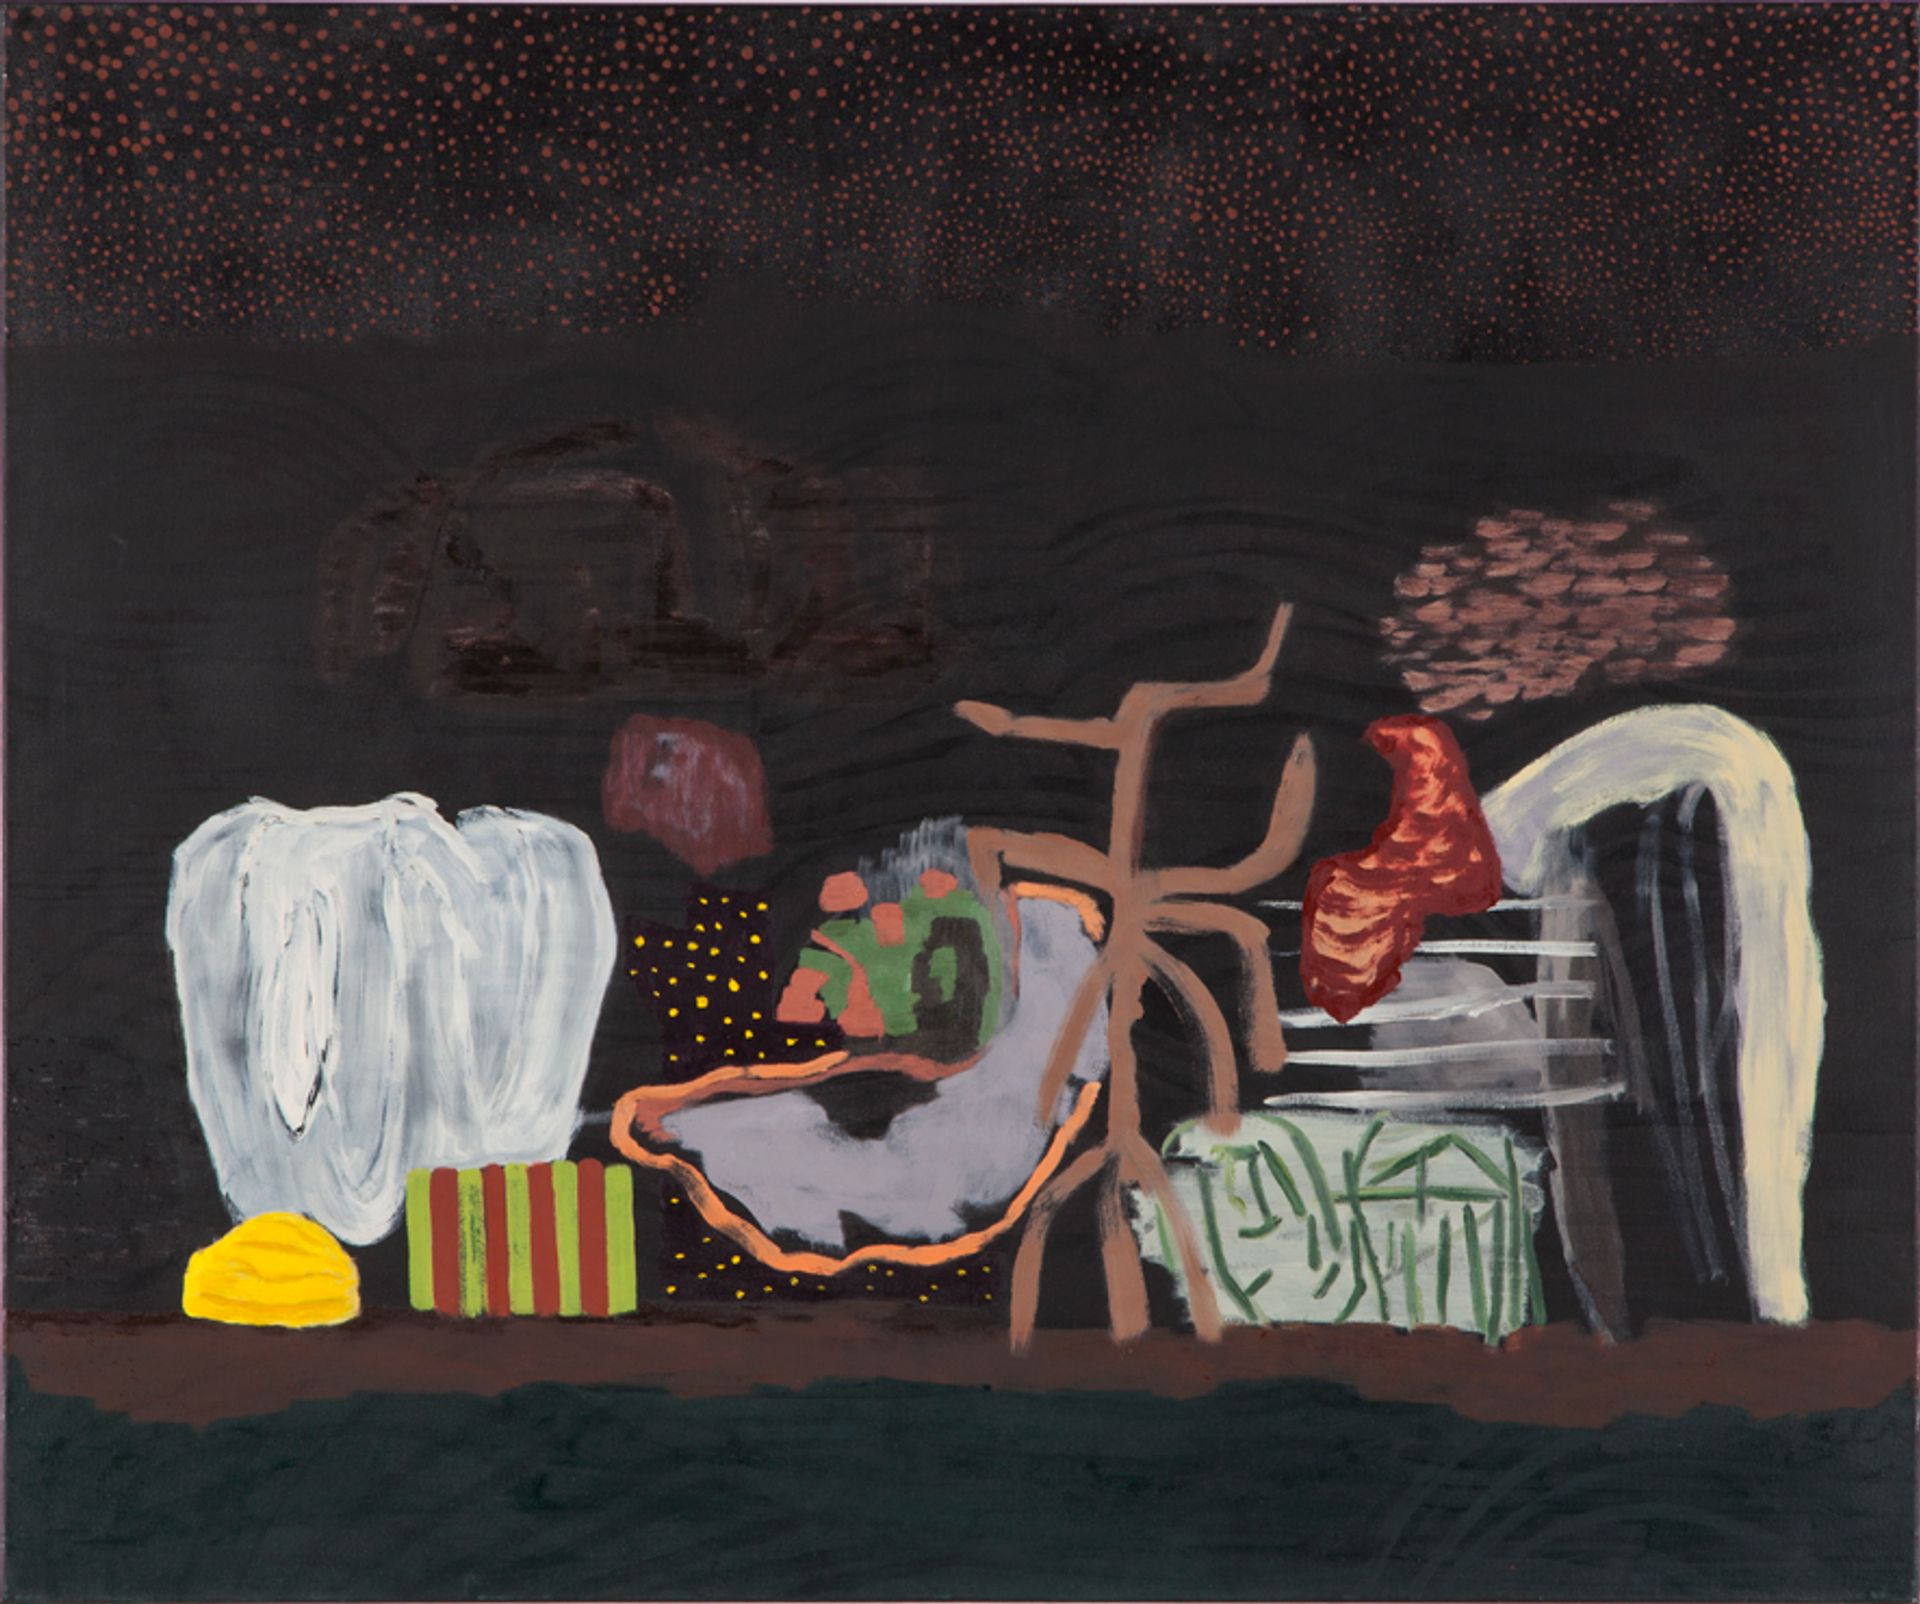 Untitled, 2012, oil on canvas, 100 × 120 cm, photo: Ivan Baschang